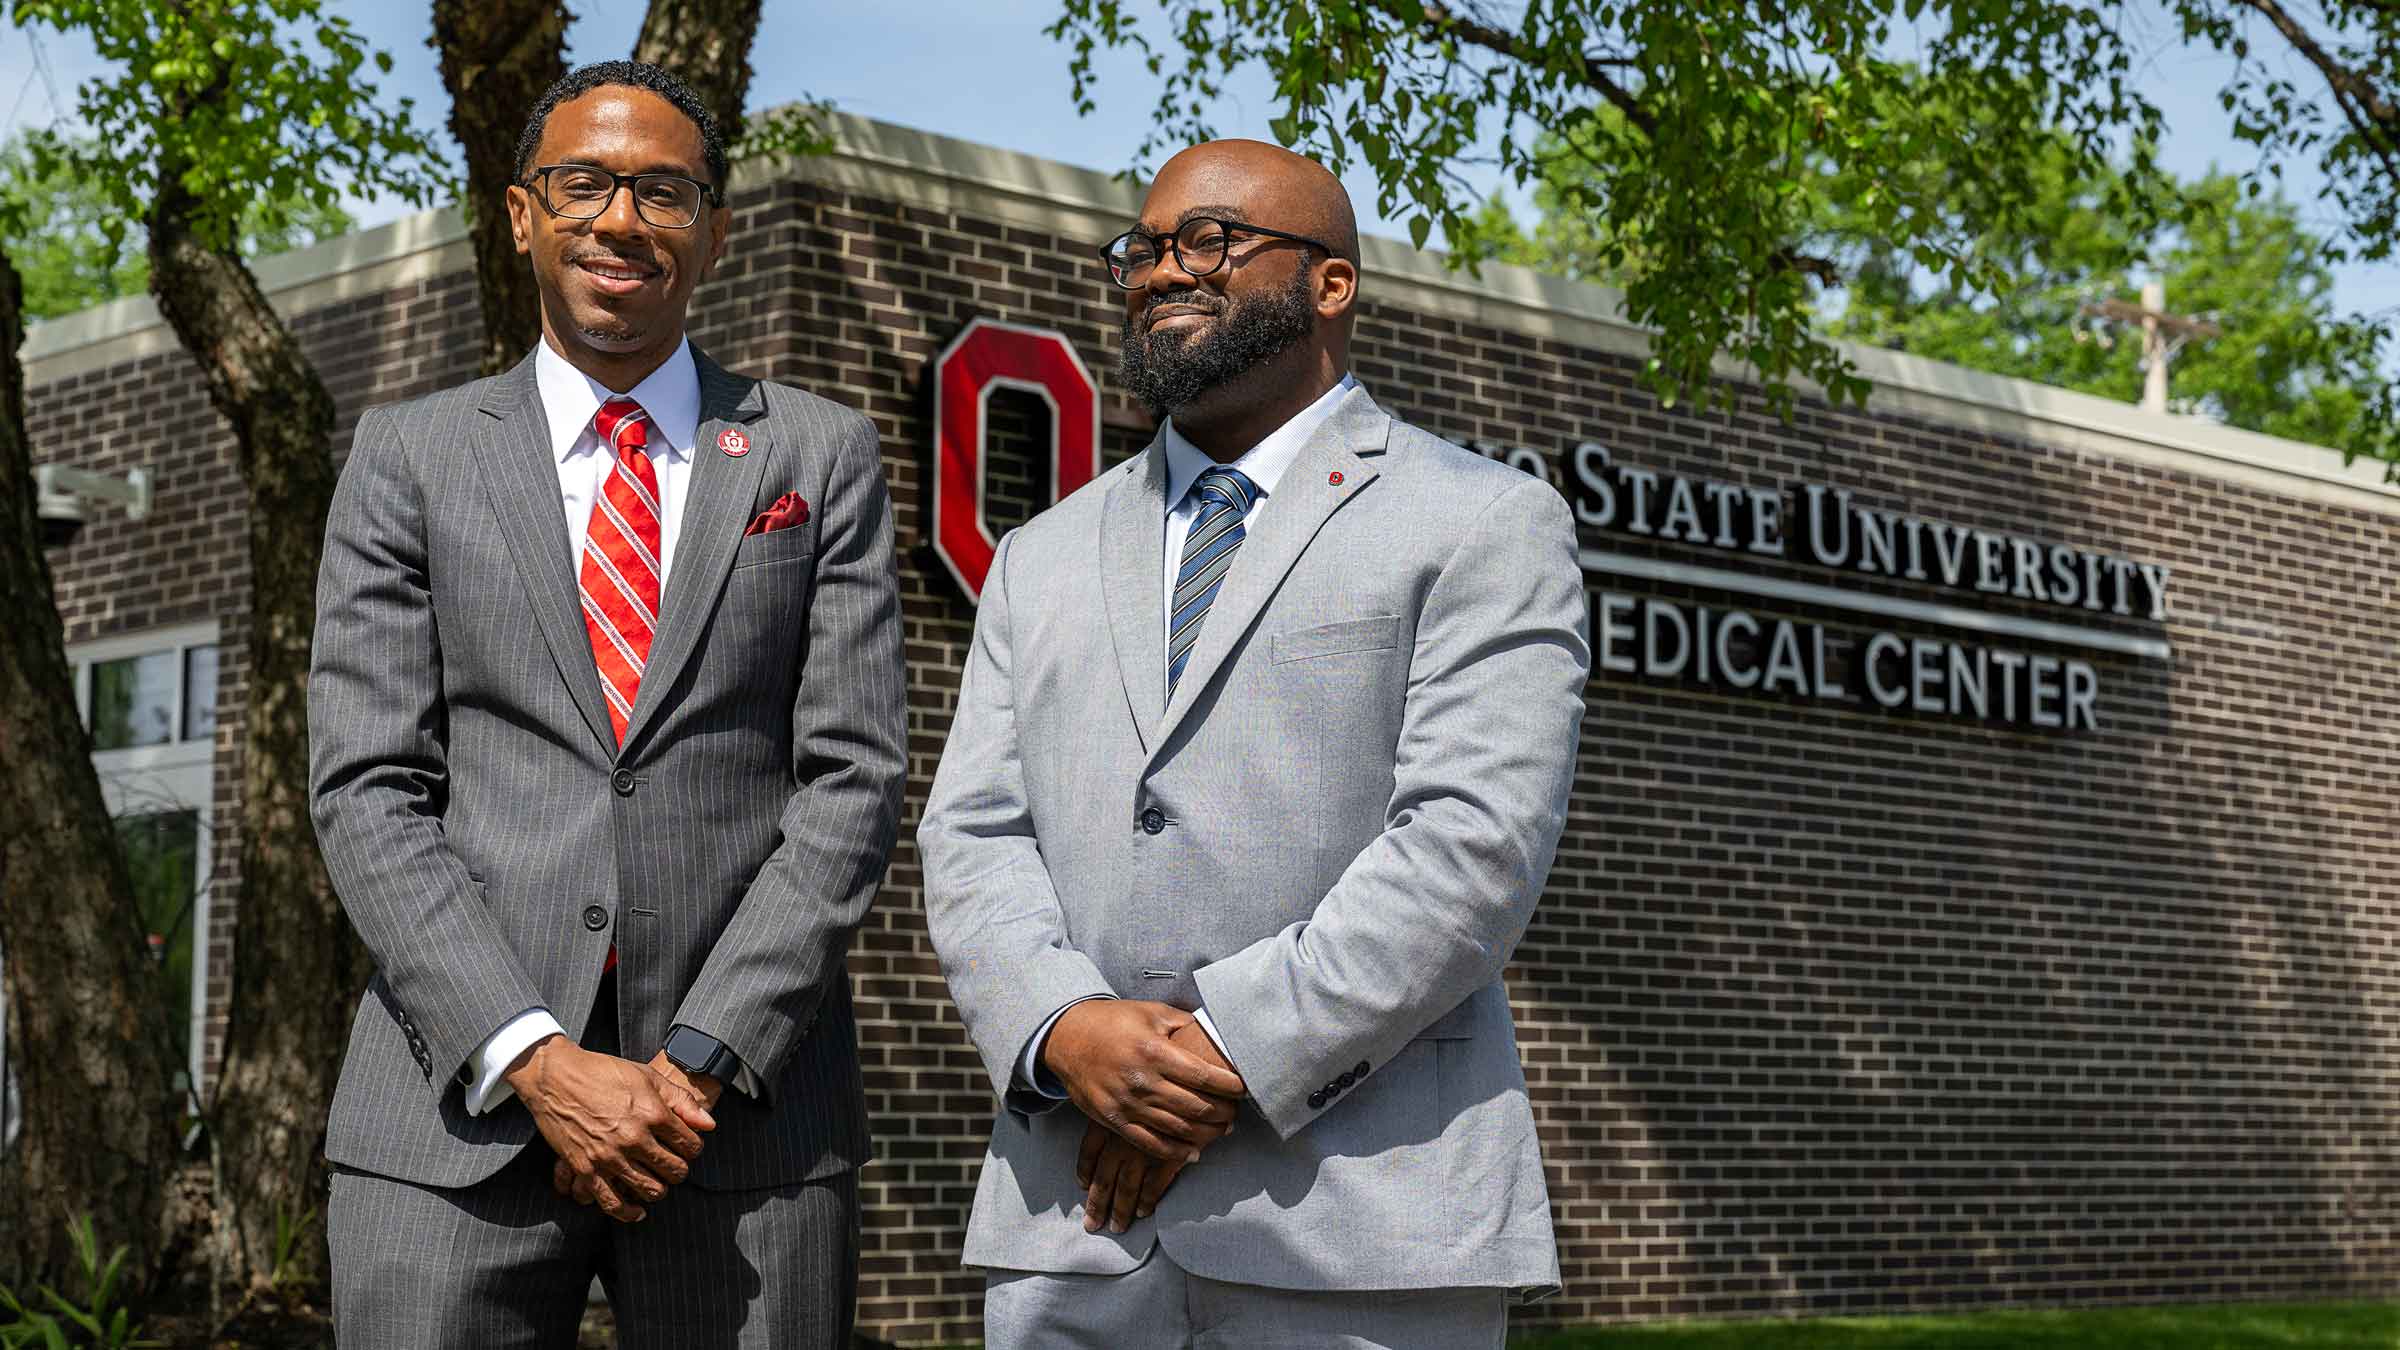 Dr. Joshua Joseph at the opening of Ohio State’s Healthy Community Center